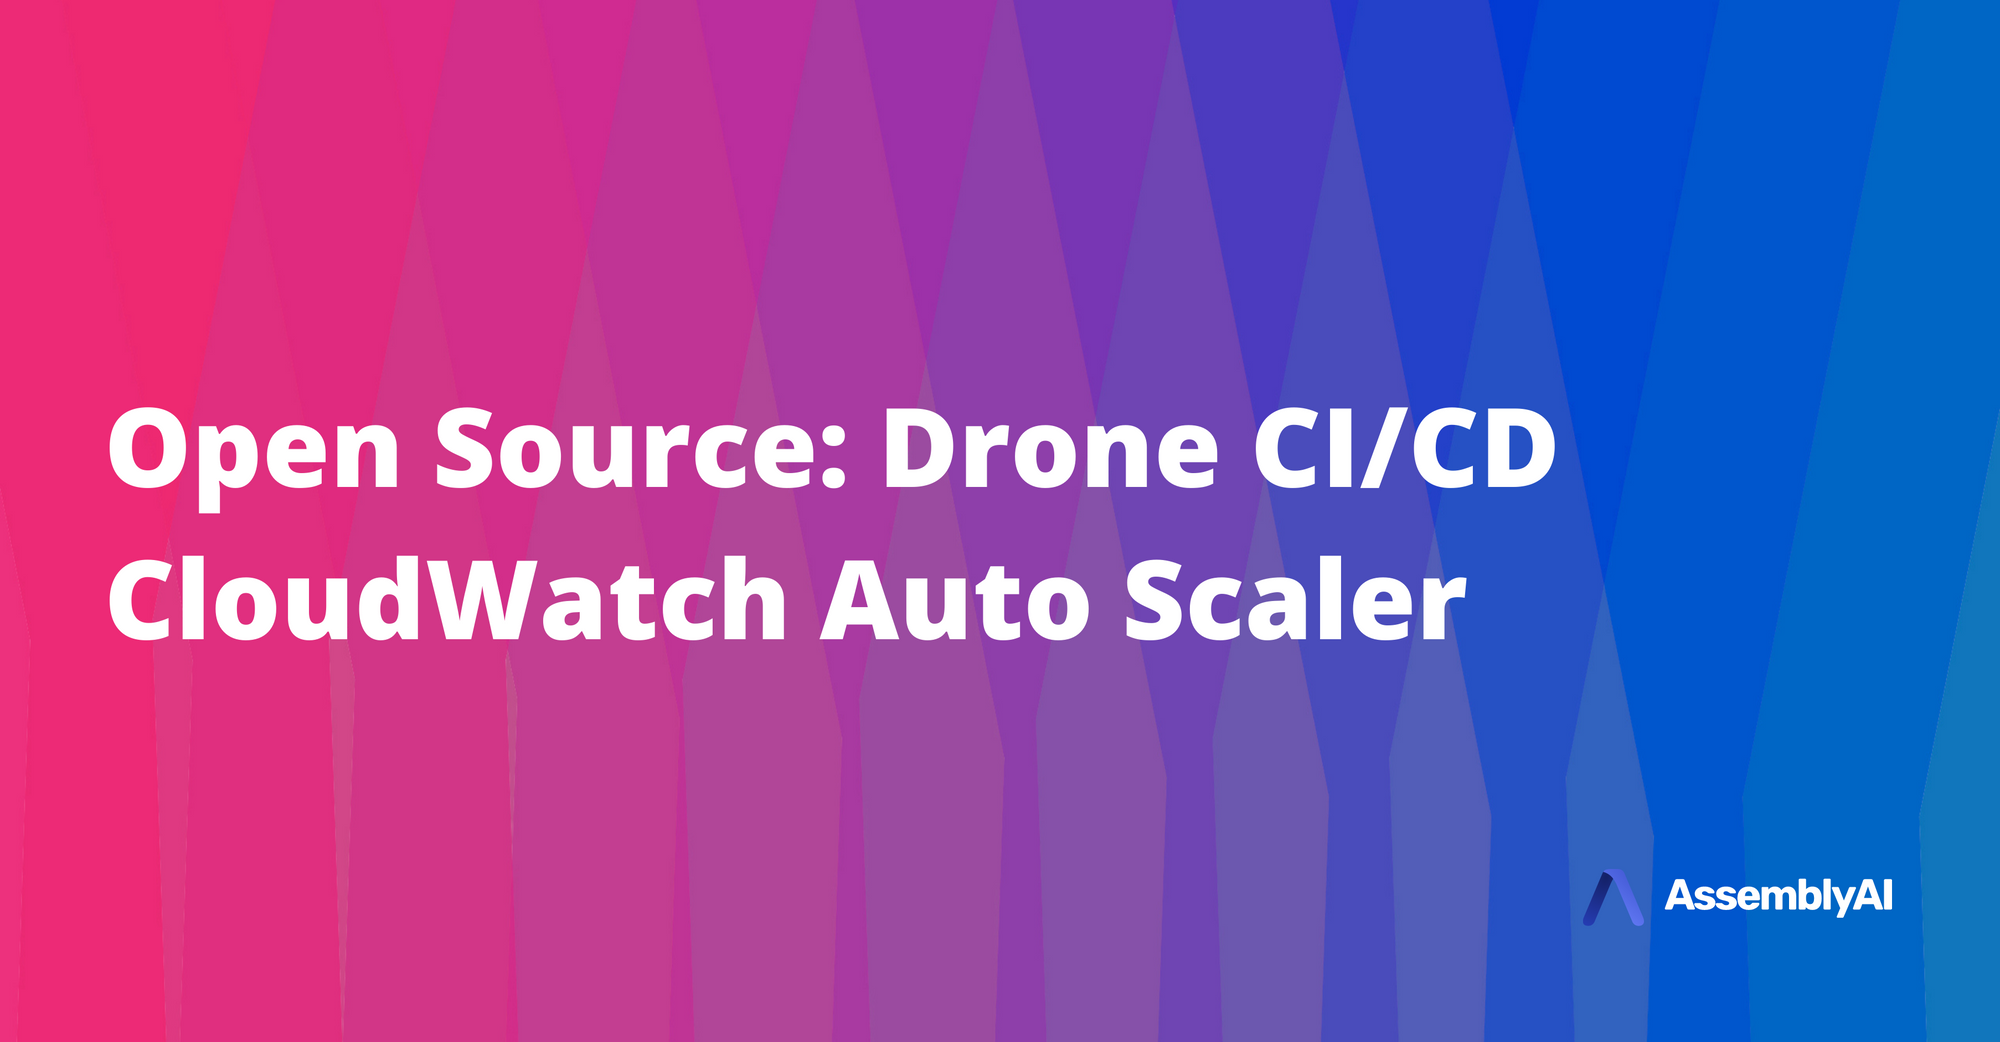 Open Sourcing our Drone CI/CD CloudWatch Auto Scaler